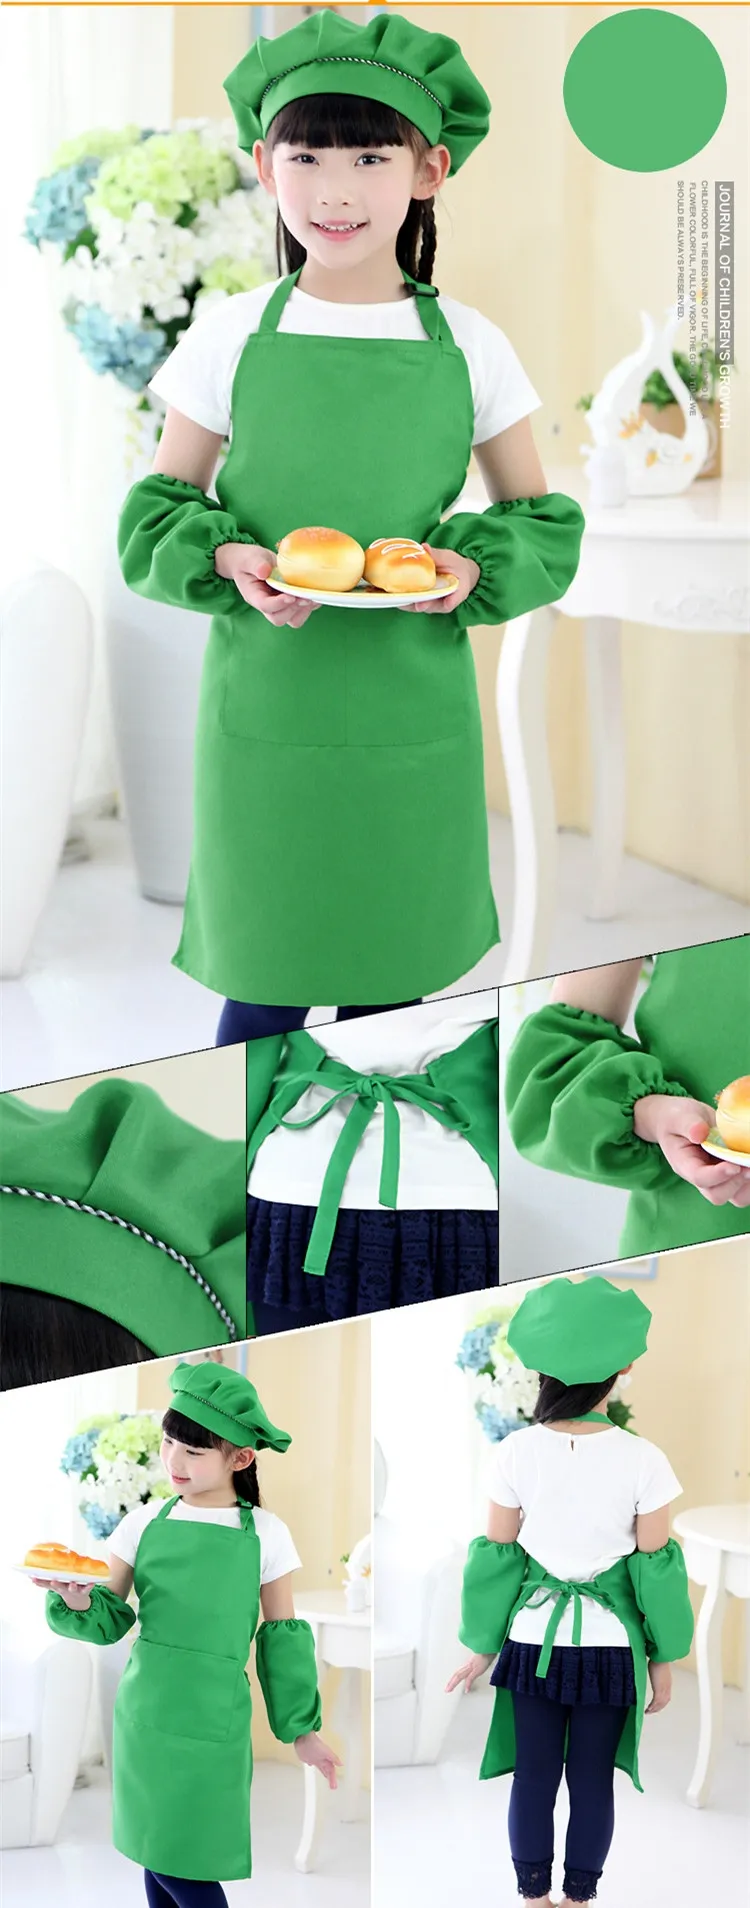 Kids Aprons Pocket Craft Cooking Baking Art Painting Kids Kitchen Dining Bib Children Aprons with hat and sleeves Kids Aprons 10 c6027242